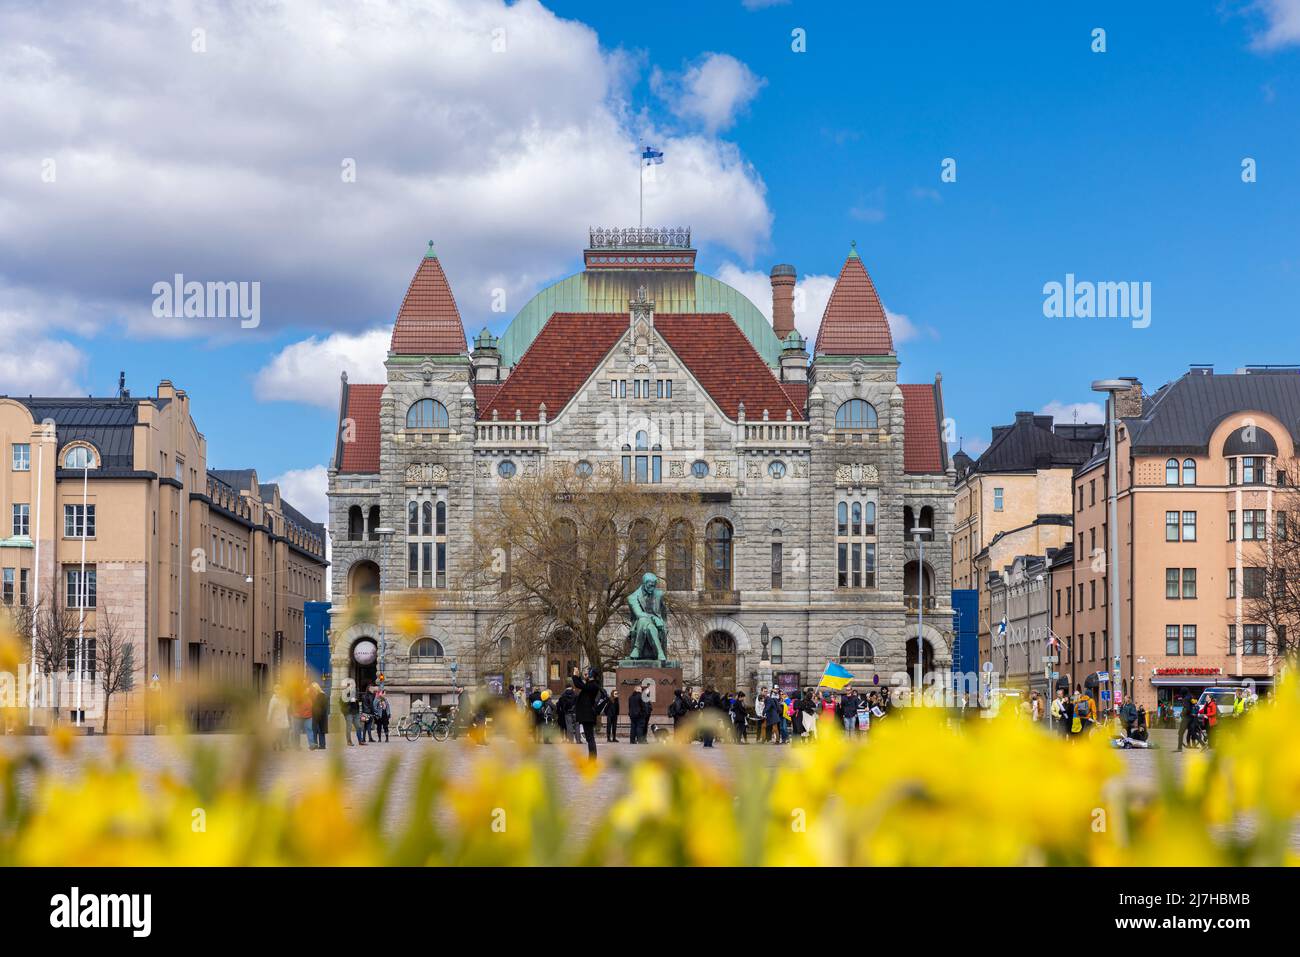 People protesting for Ukraine in front of Finnish national Theatre building Stock Photo